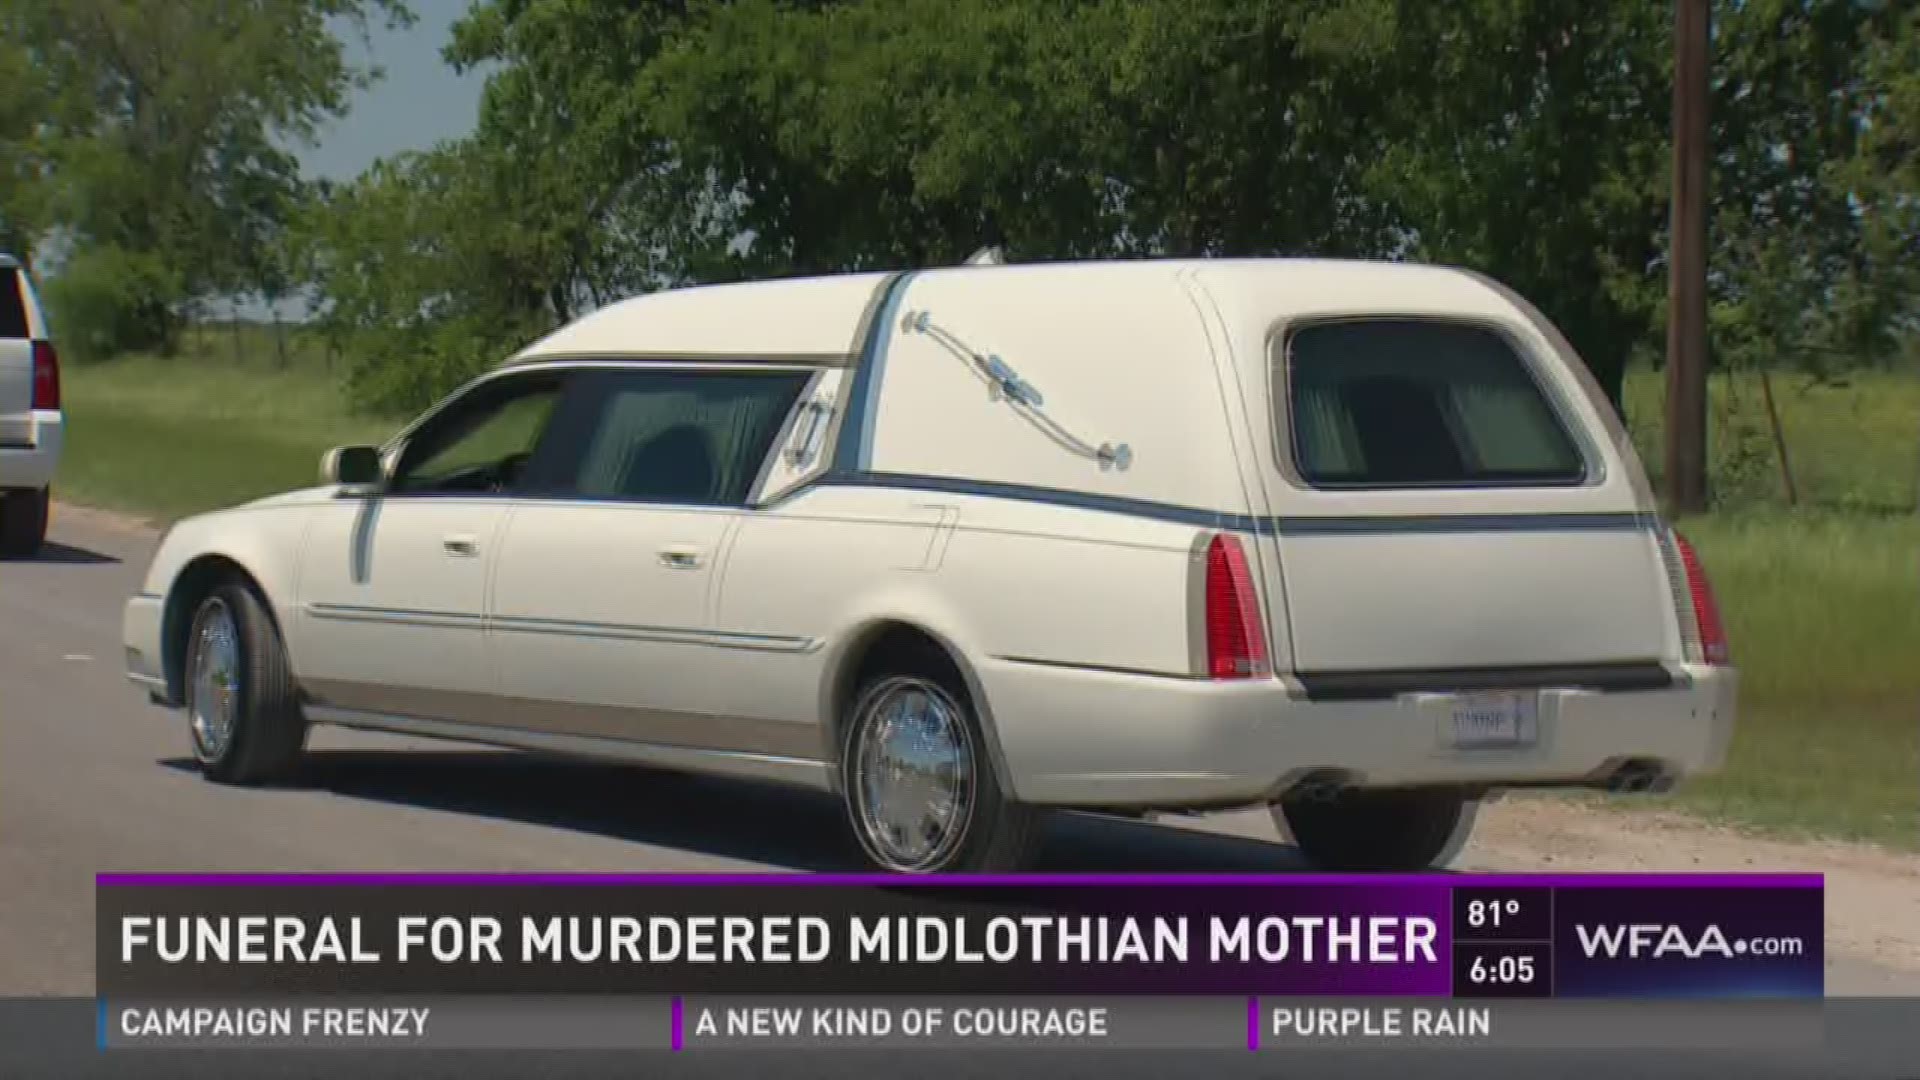 Missy Bevers was laid to rest Saturday in Waxahachie. Sebastian Robertson reports.